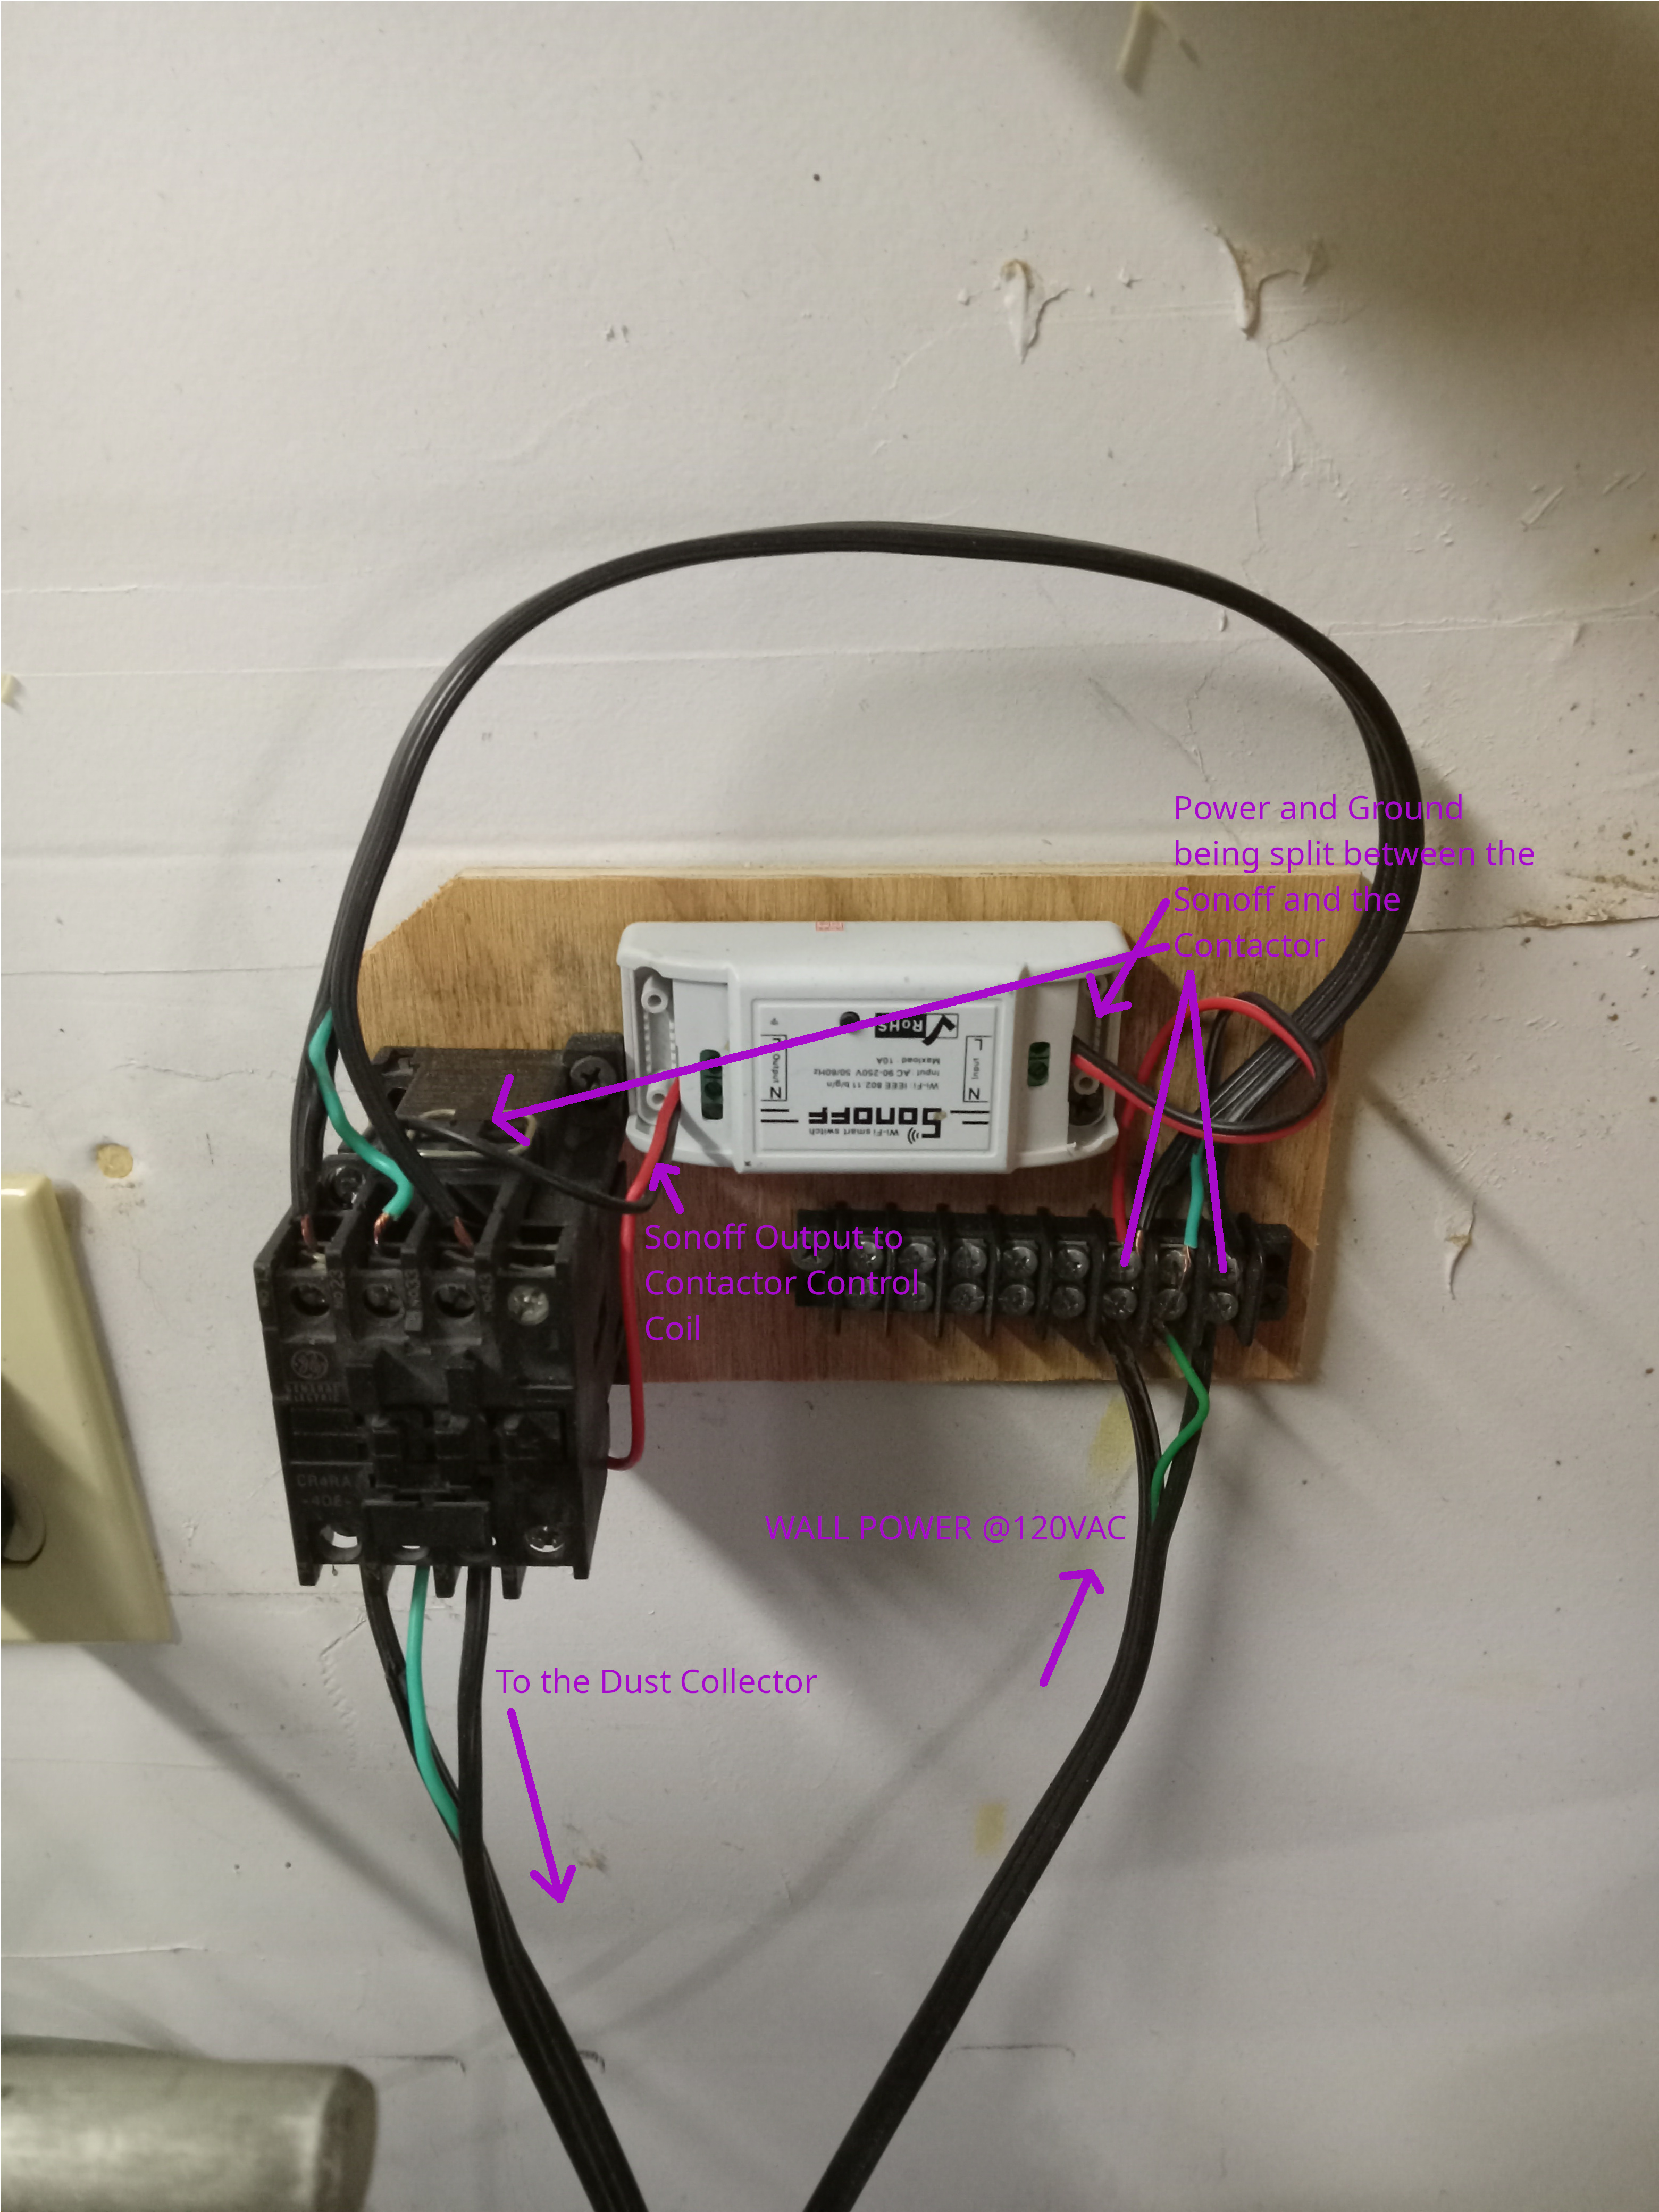 DIY Dust Collector Control mounted to the wall